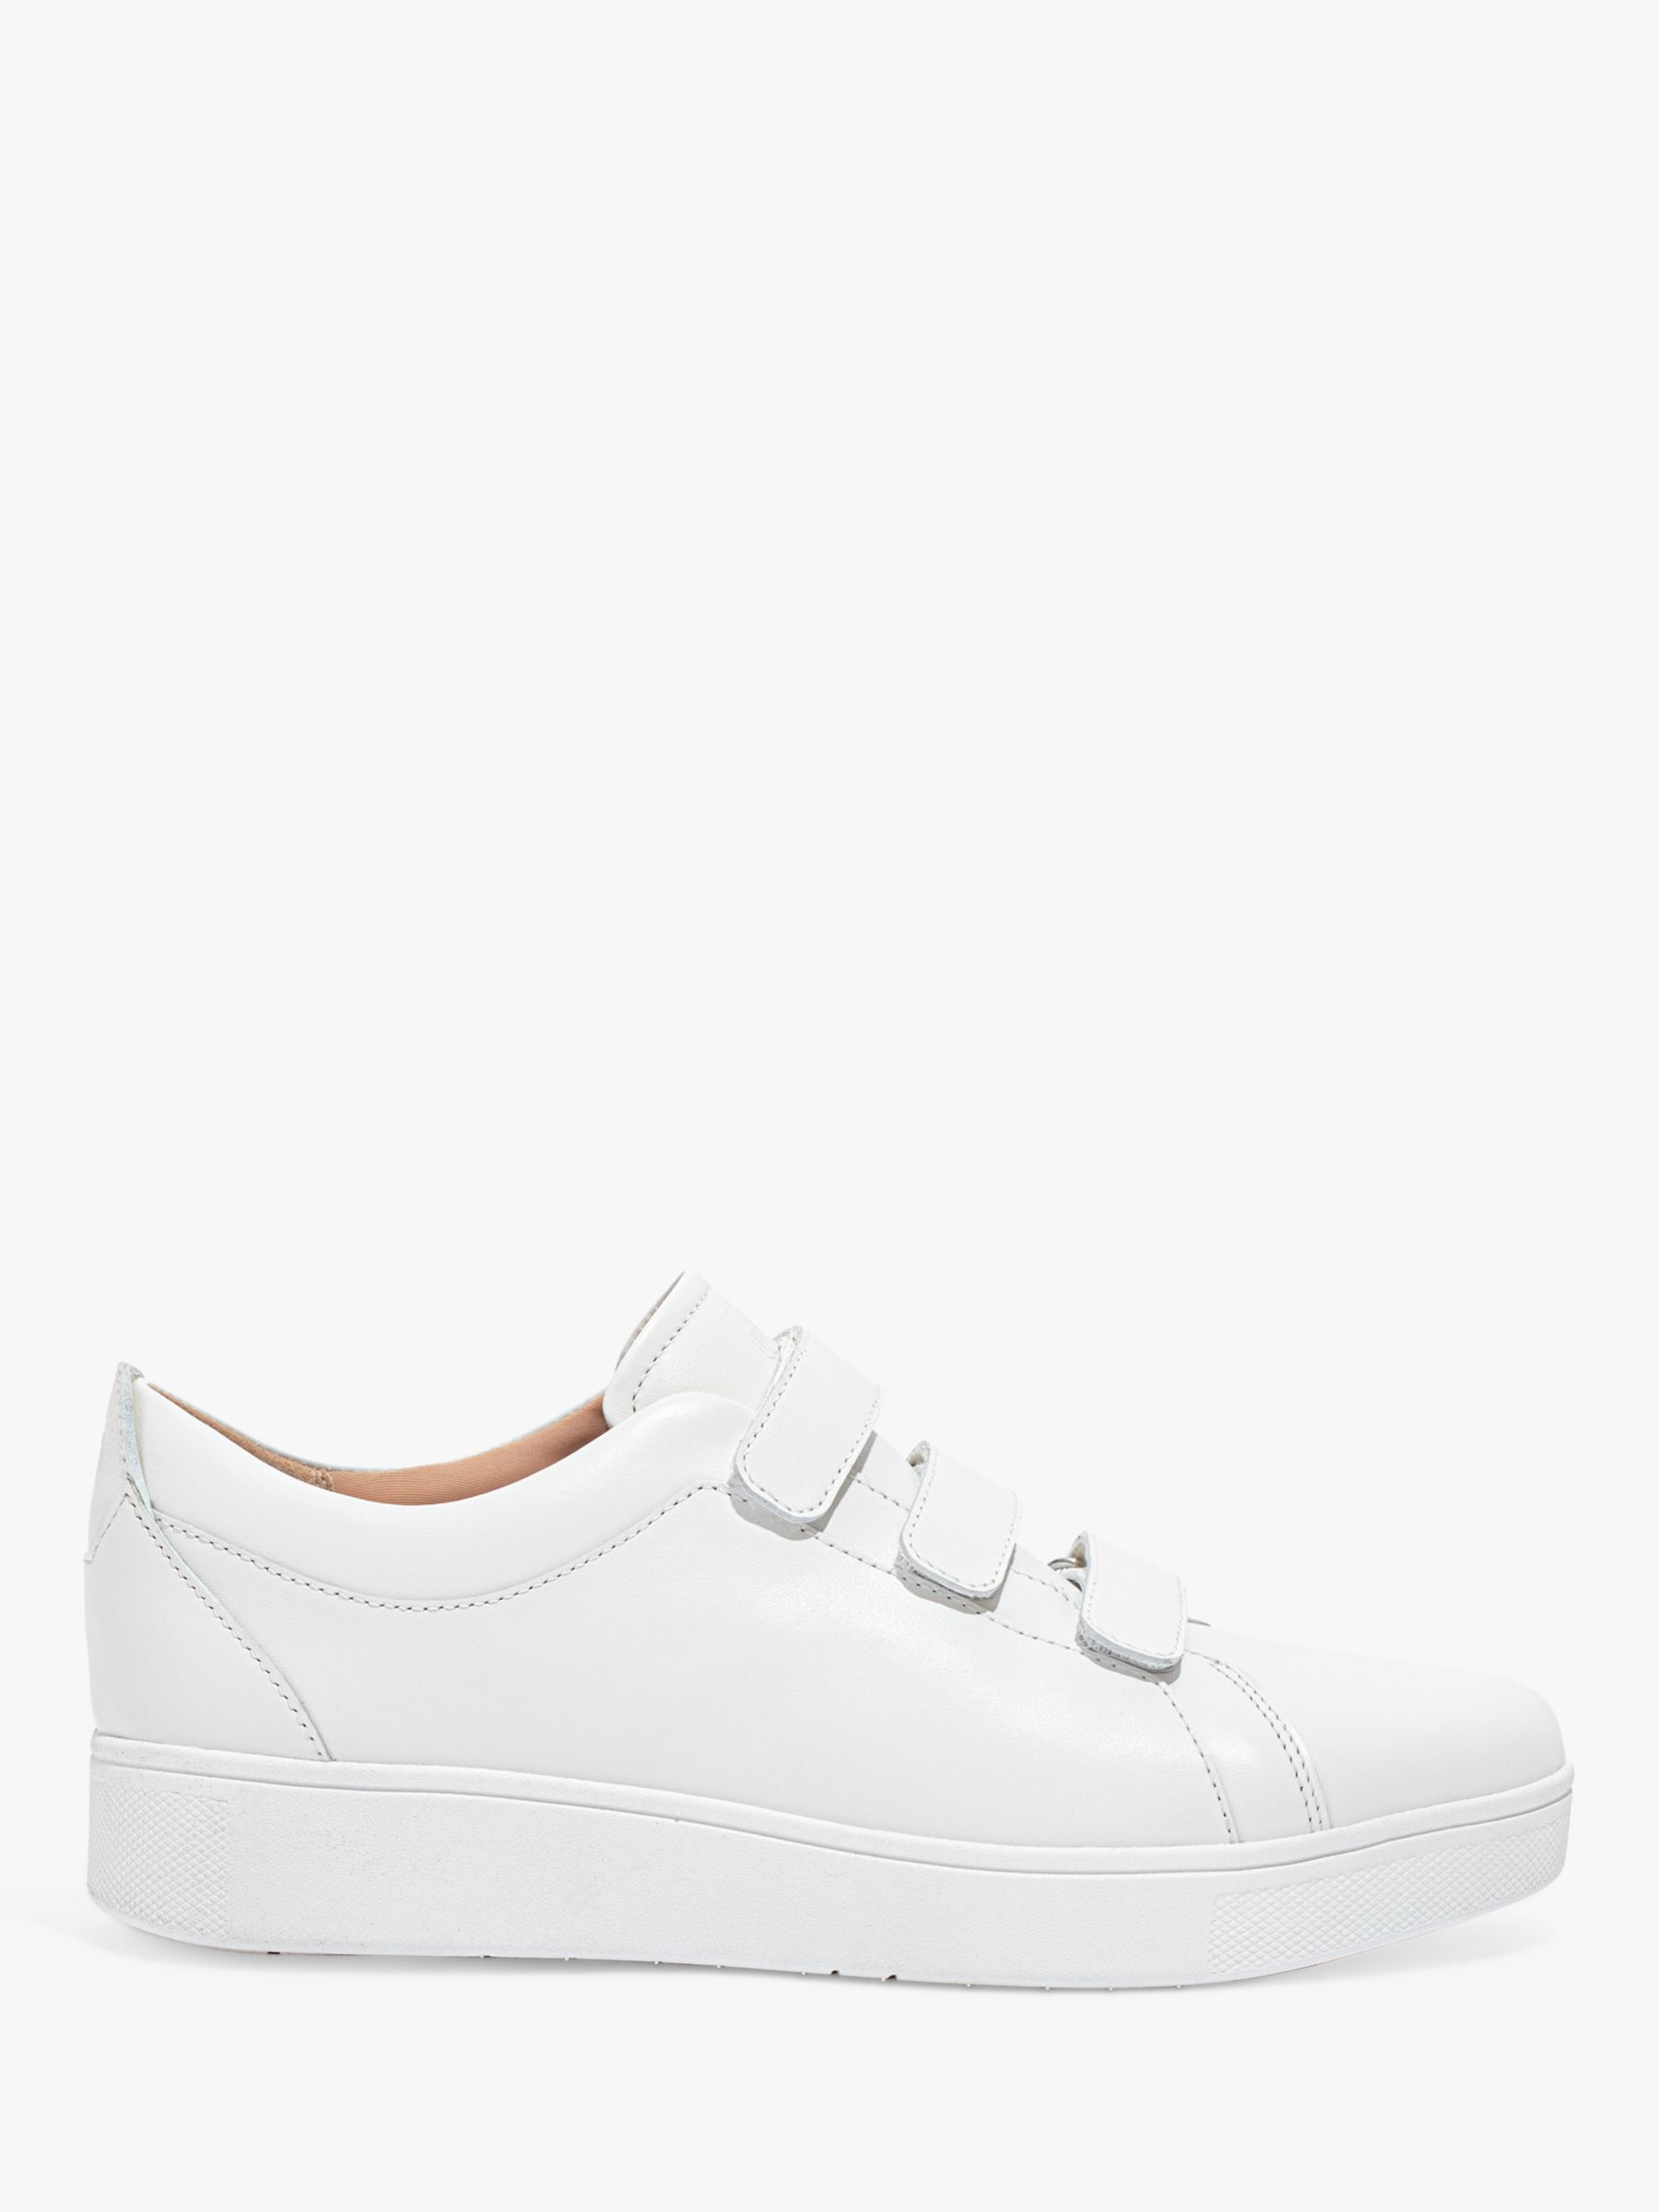 FitFlop Rally Strap Leather Trainers, Urban White, 8